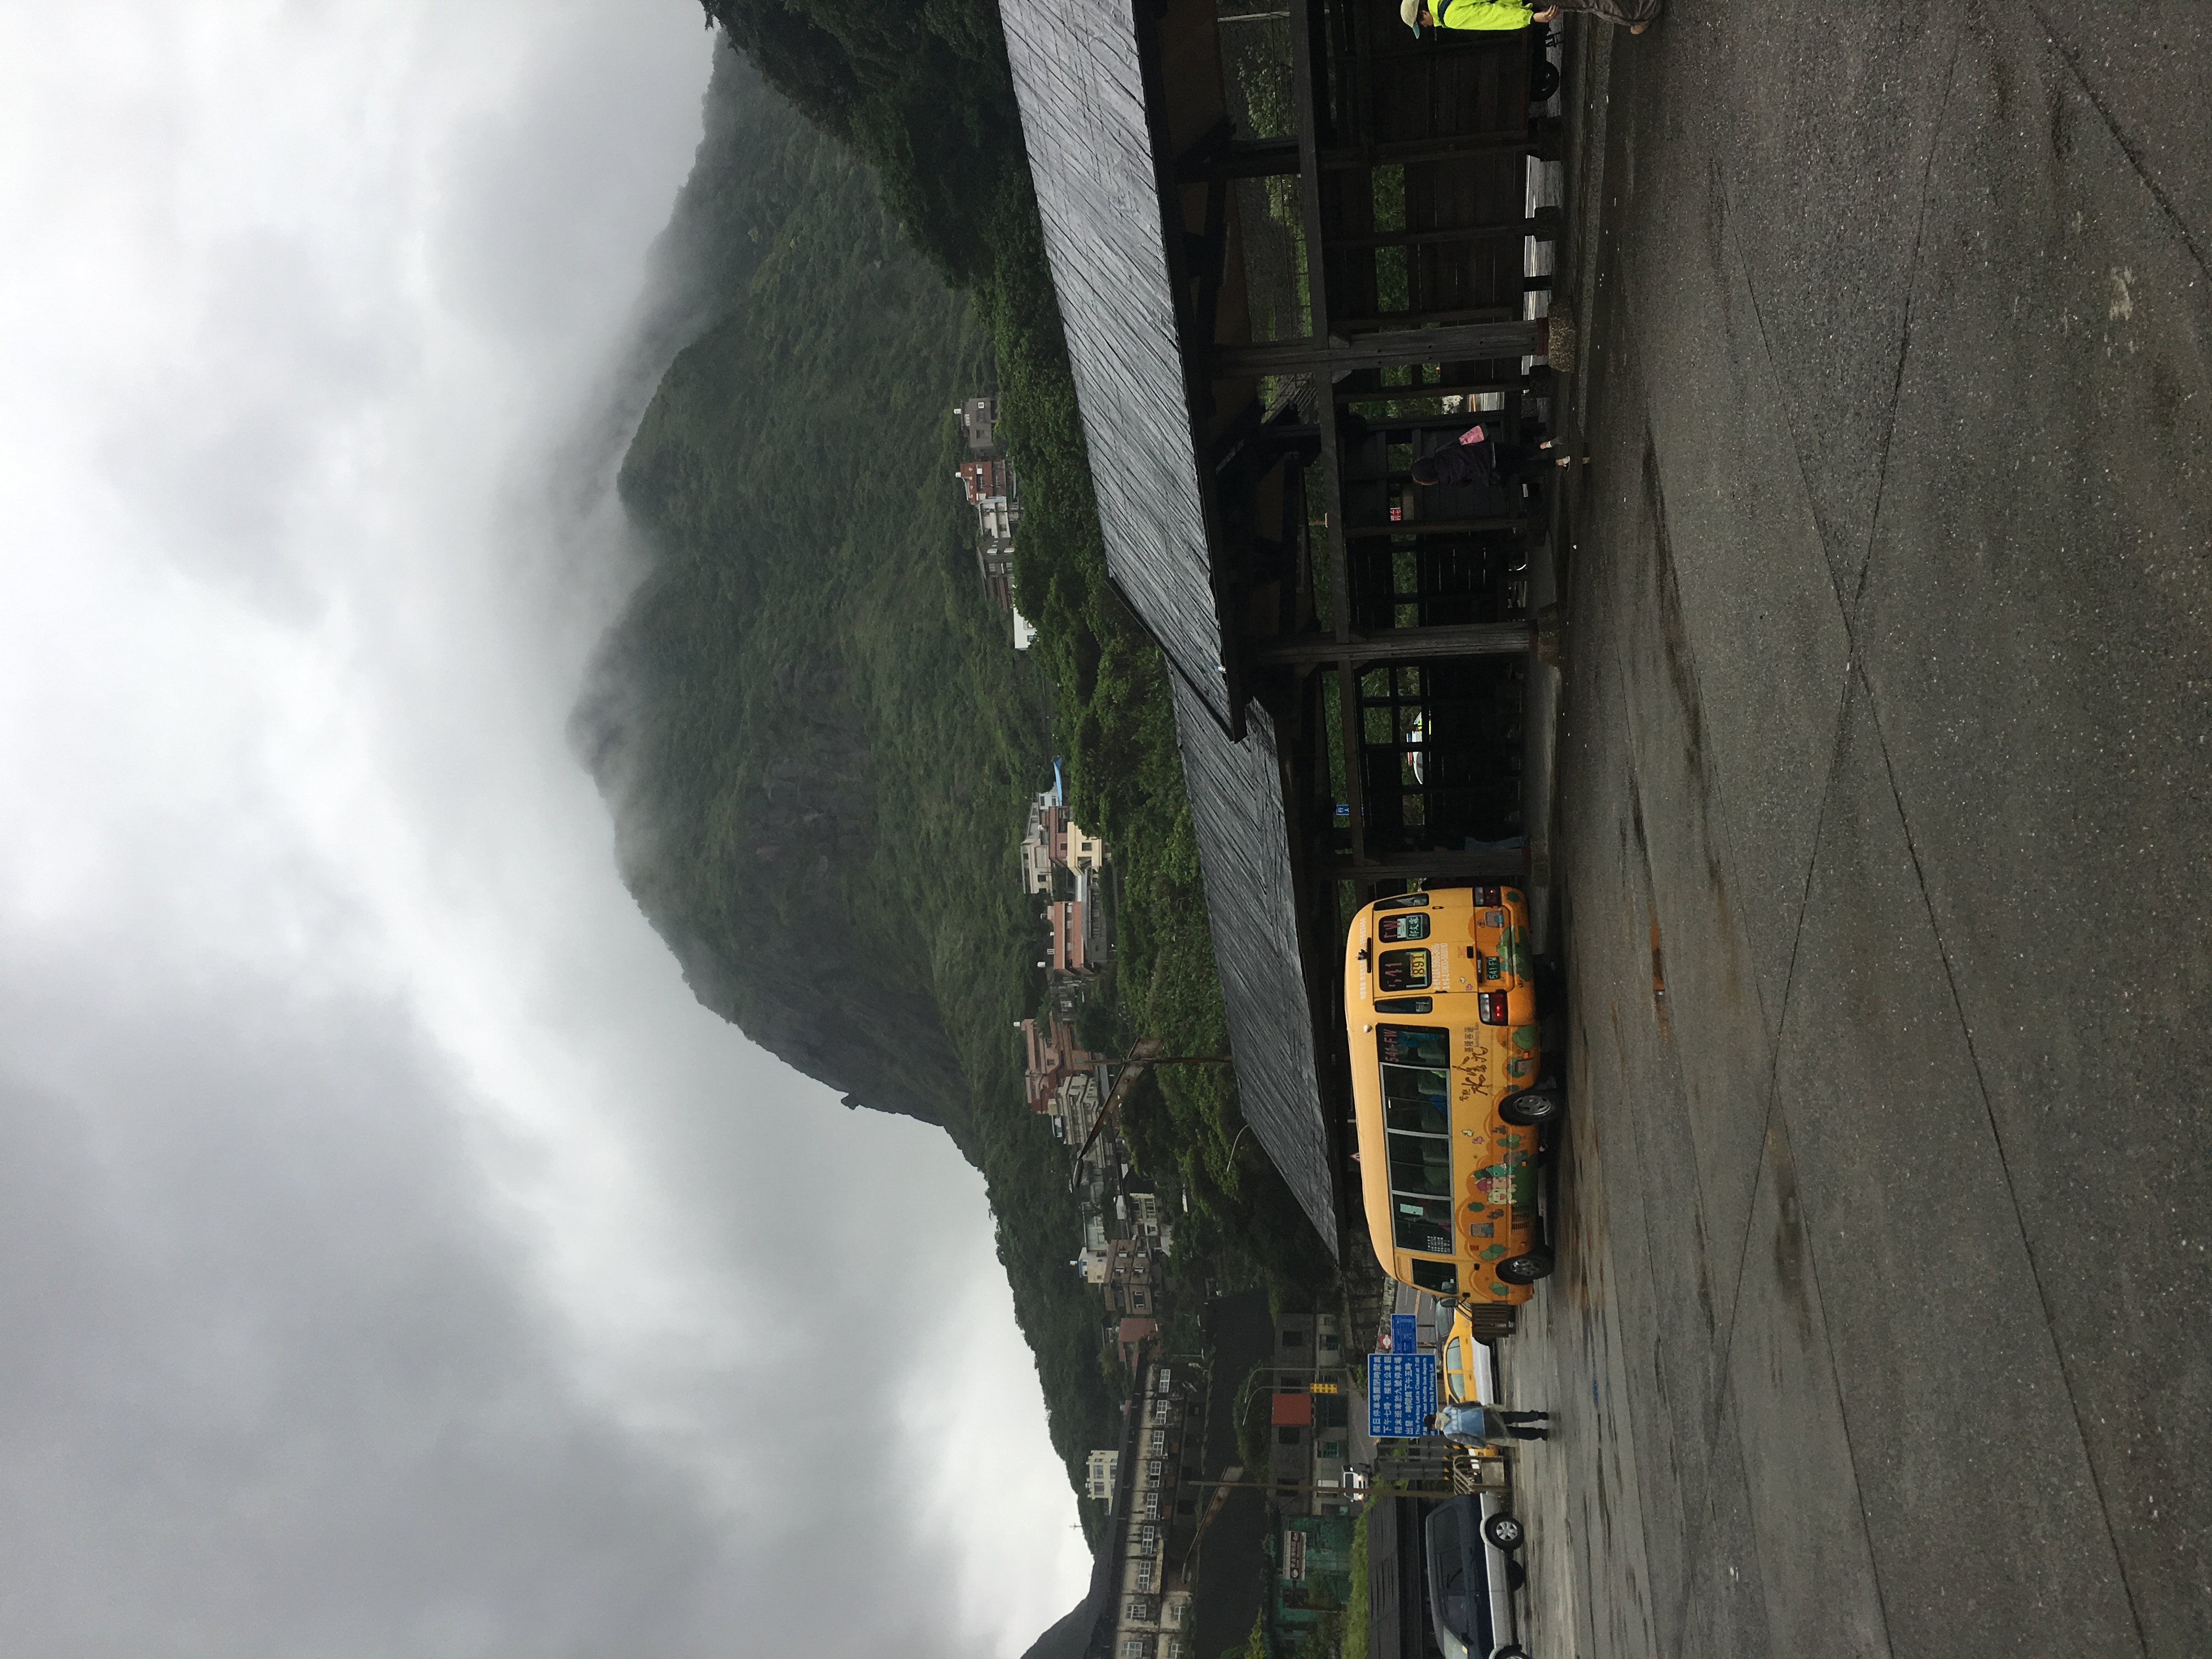 bus station at the base of a green mountain capped with clouds